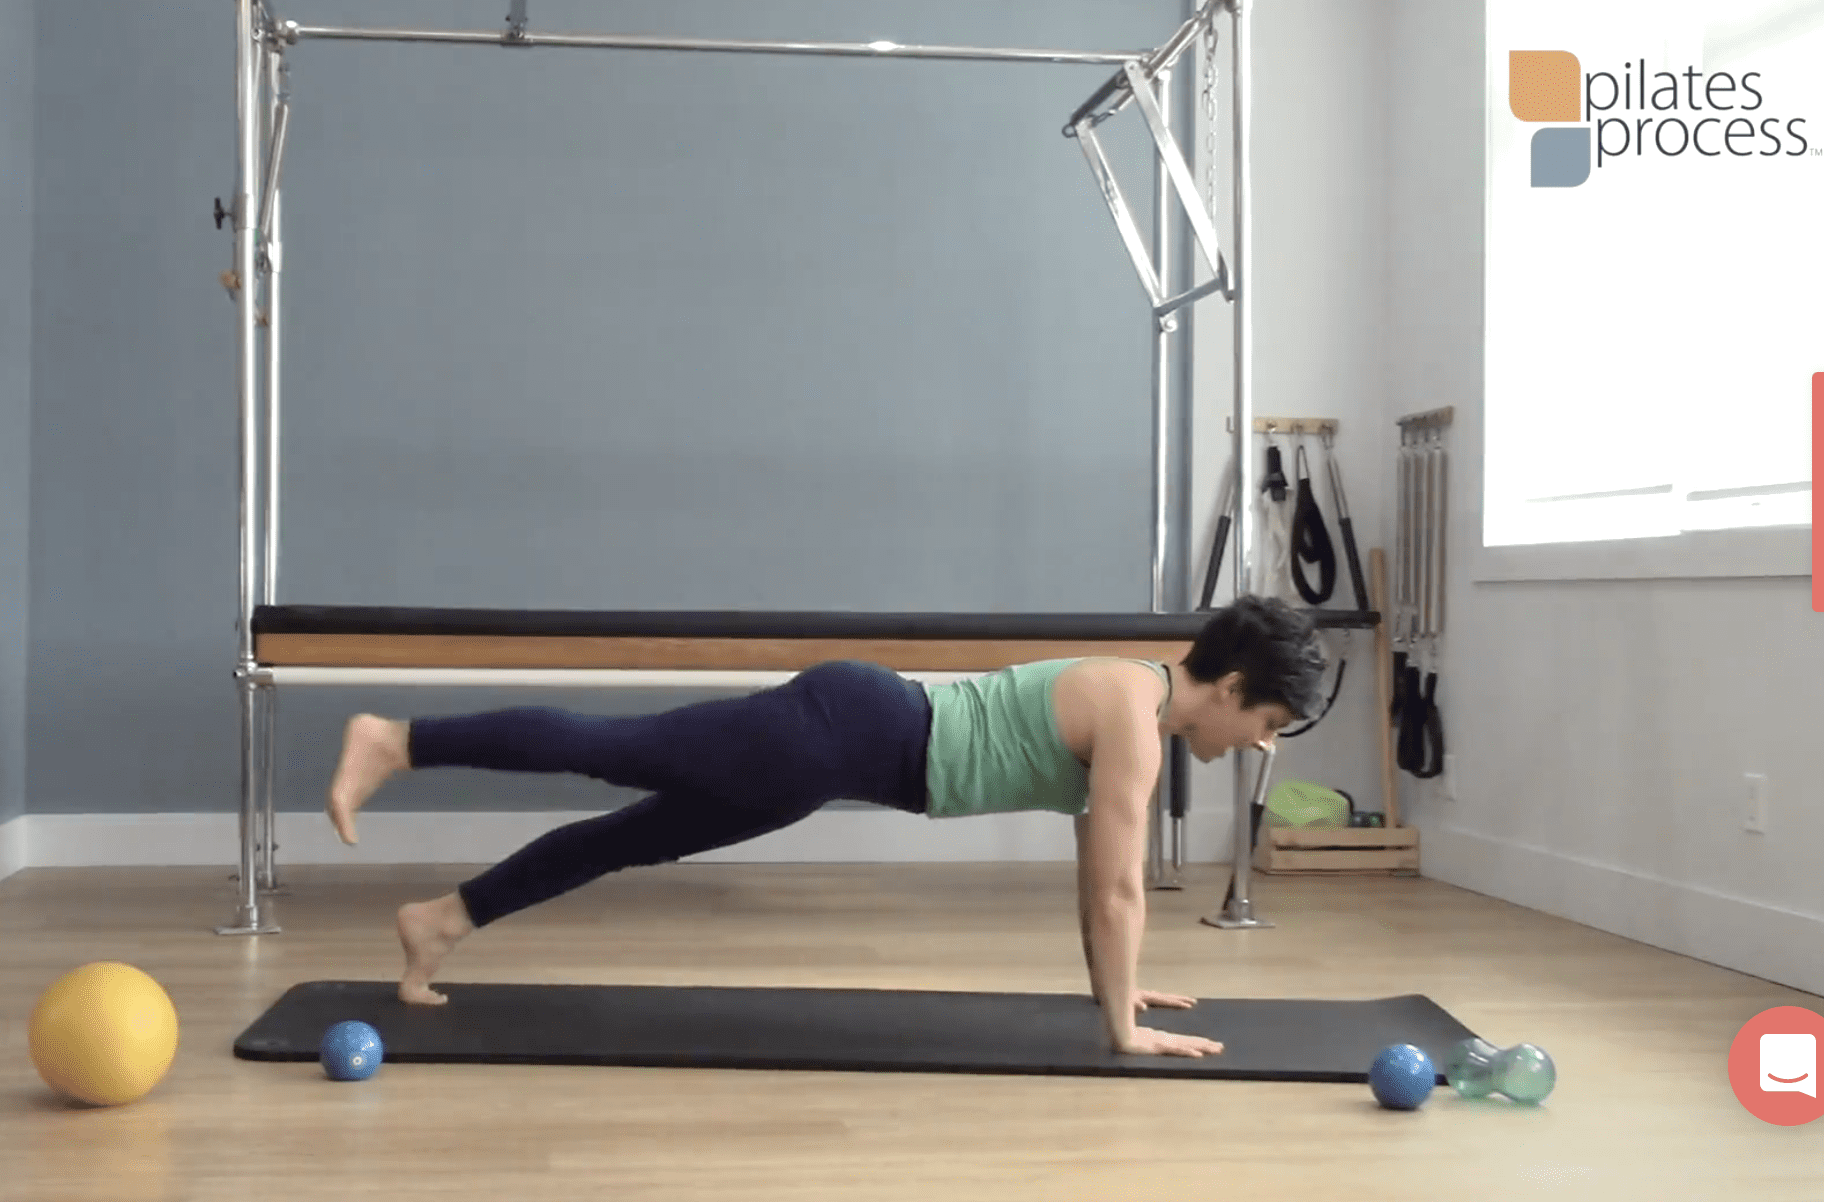 How does Pilates Reformer compare to resistance band training for shap